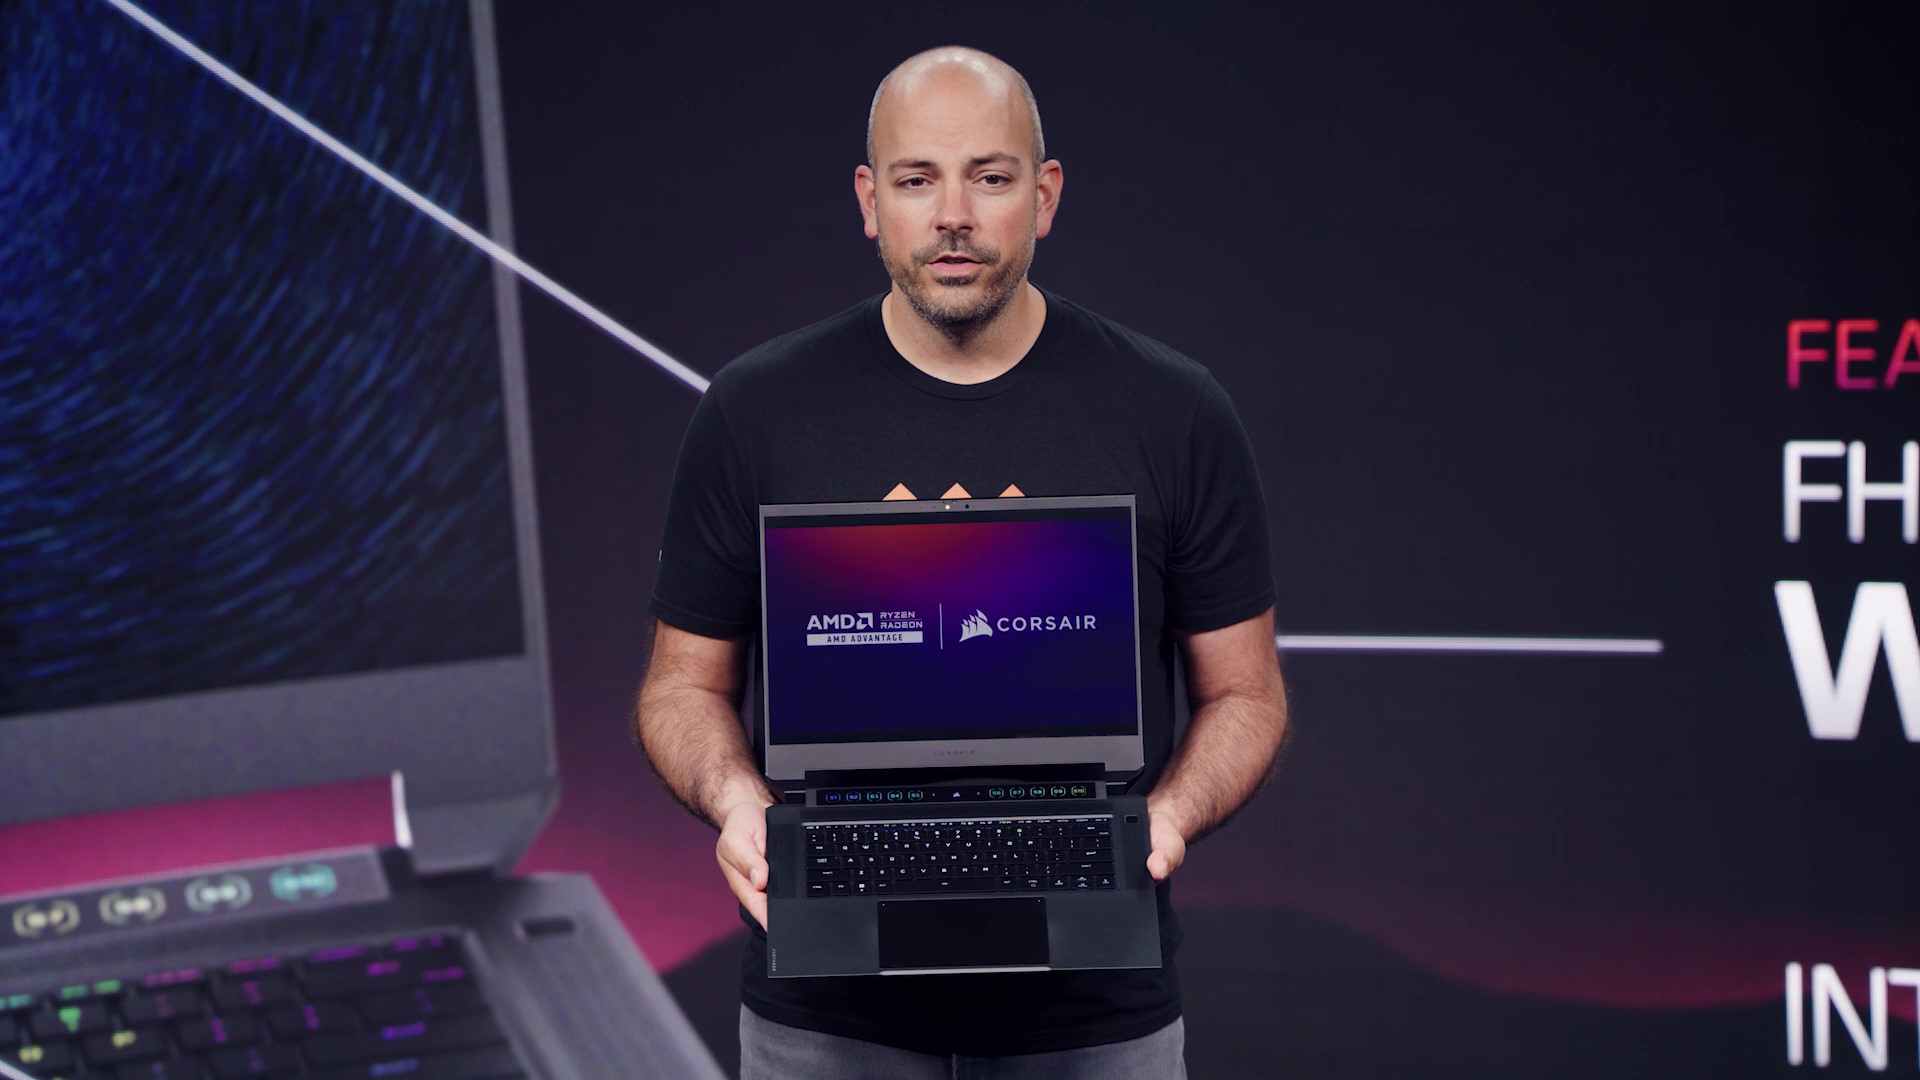 Corsair’s first gaming laptop ever goes all-in on AMD